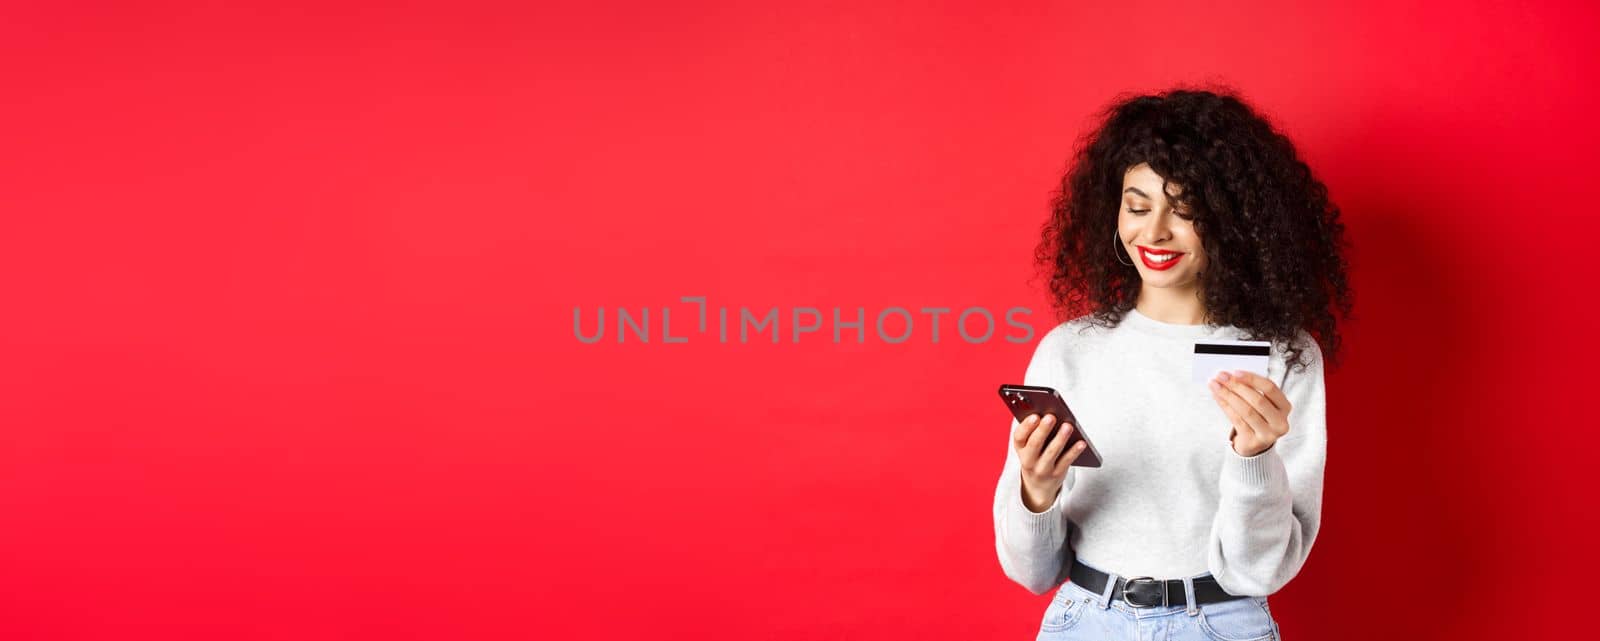 E-commerce and online shopping concept. Attractive caucasian woman paying for purchase in internet, holding smartphone and credit card, red background.